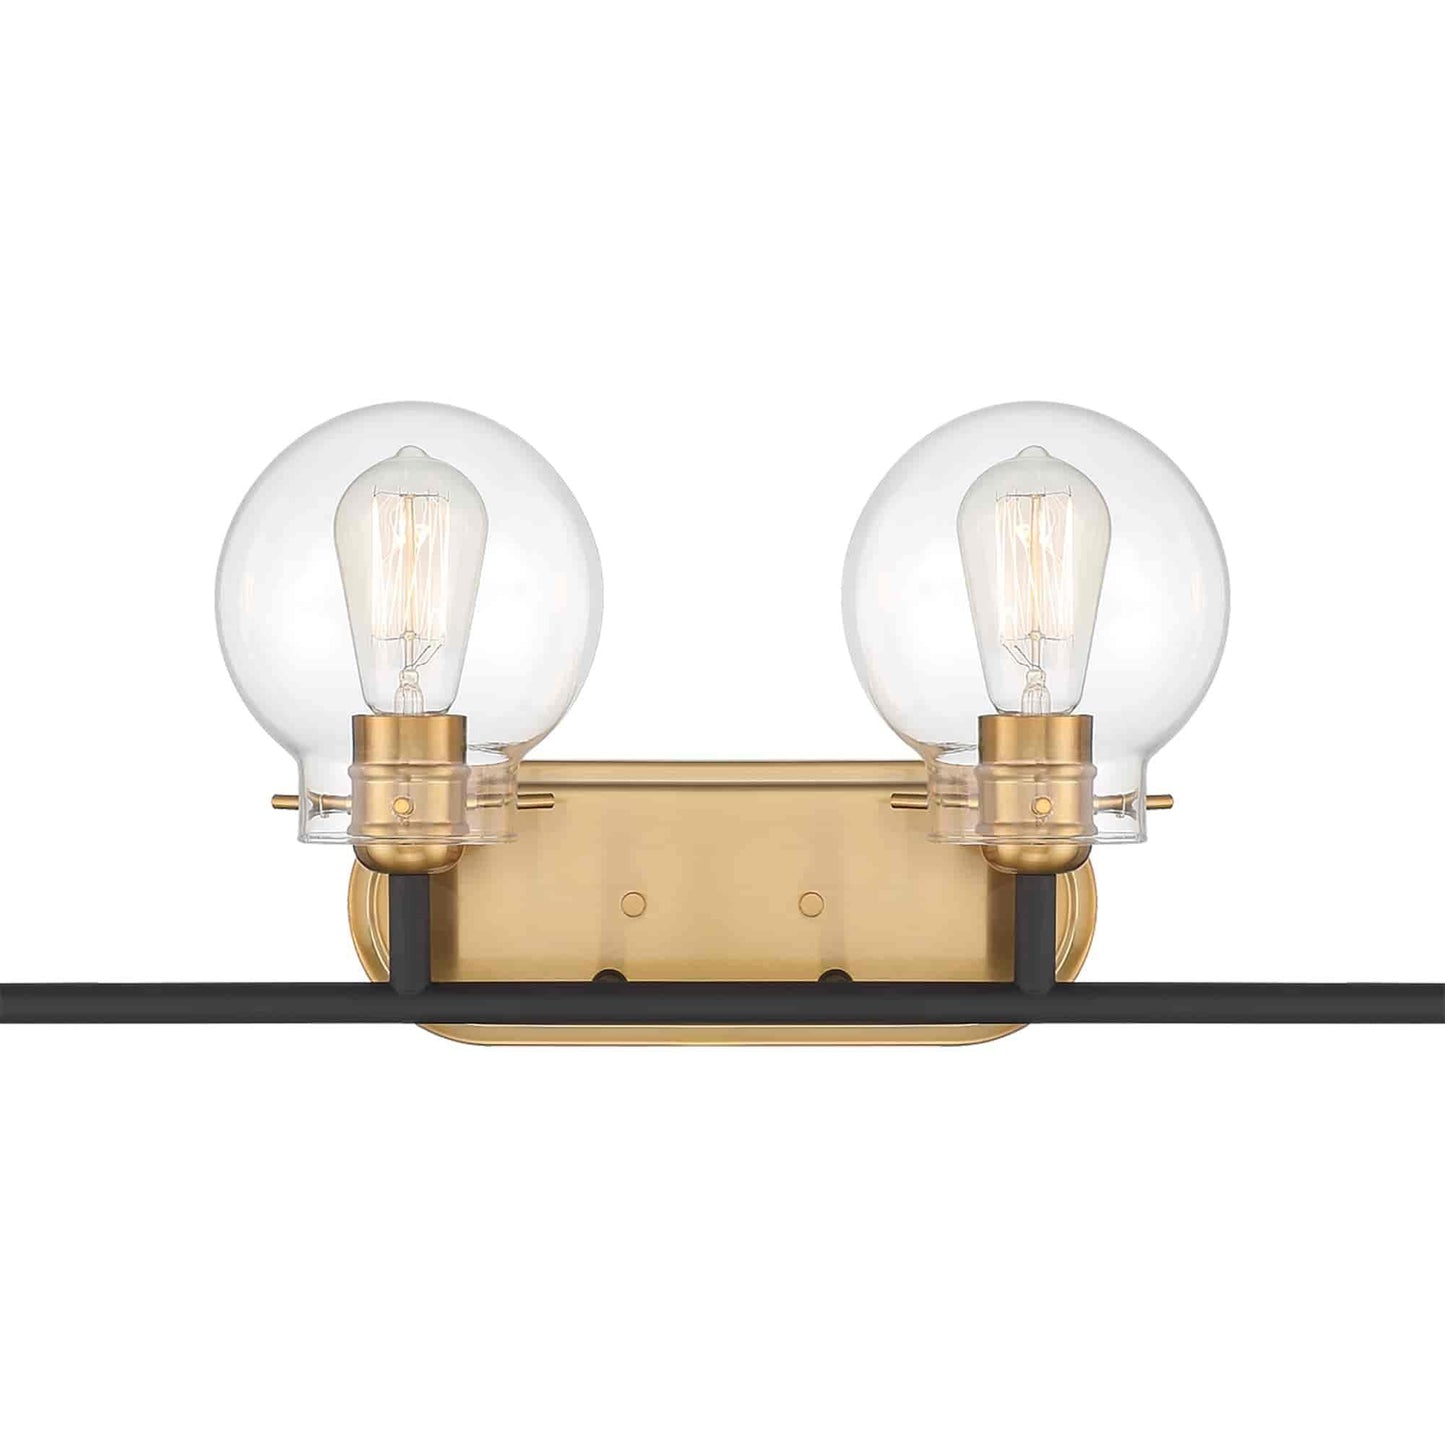 10504CL | 4 - Light Dimmable Vanity Light by ACROMA™  UL - ACROMA